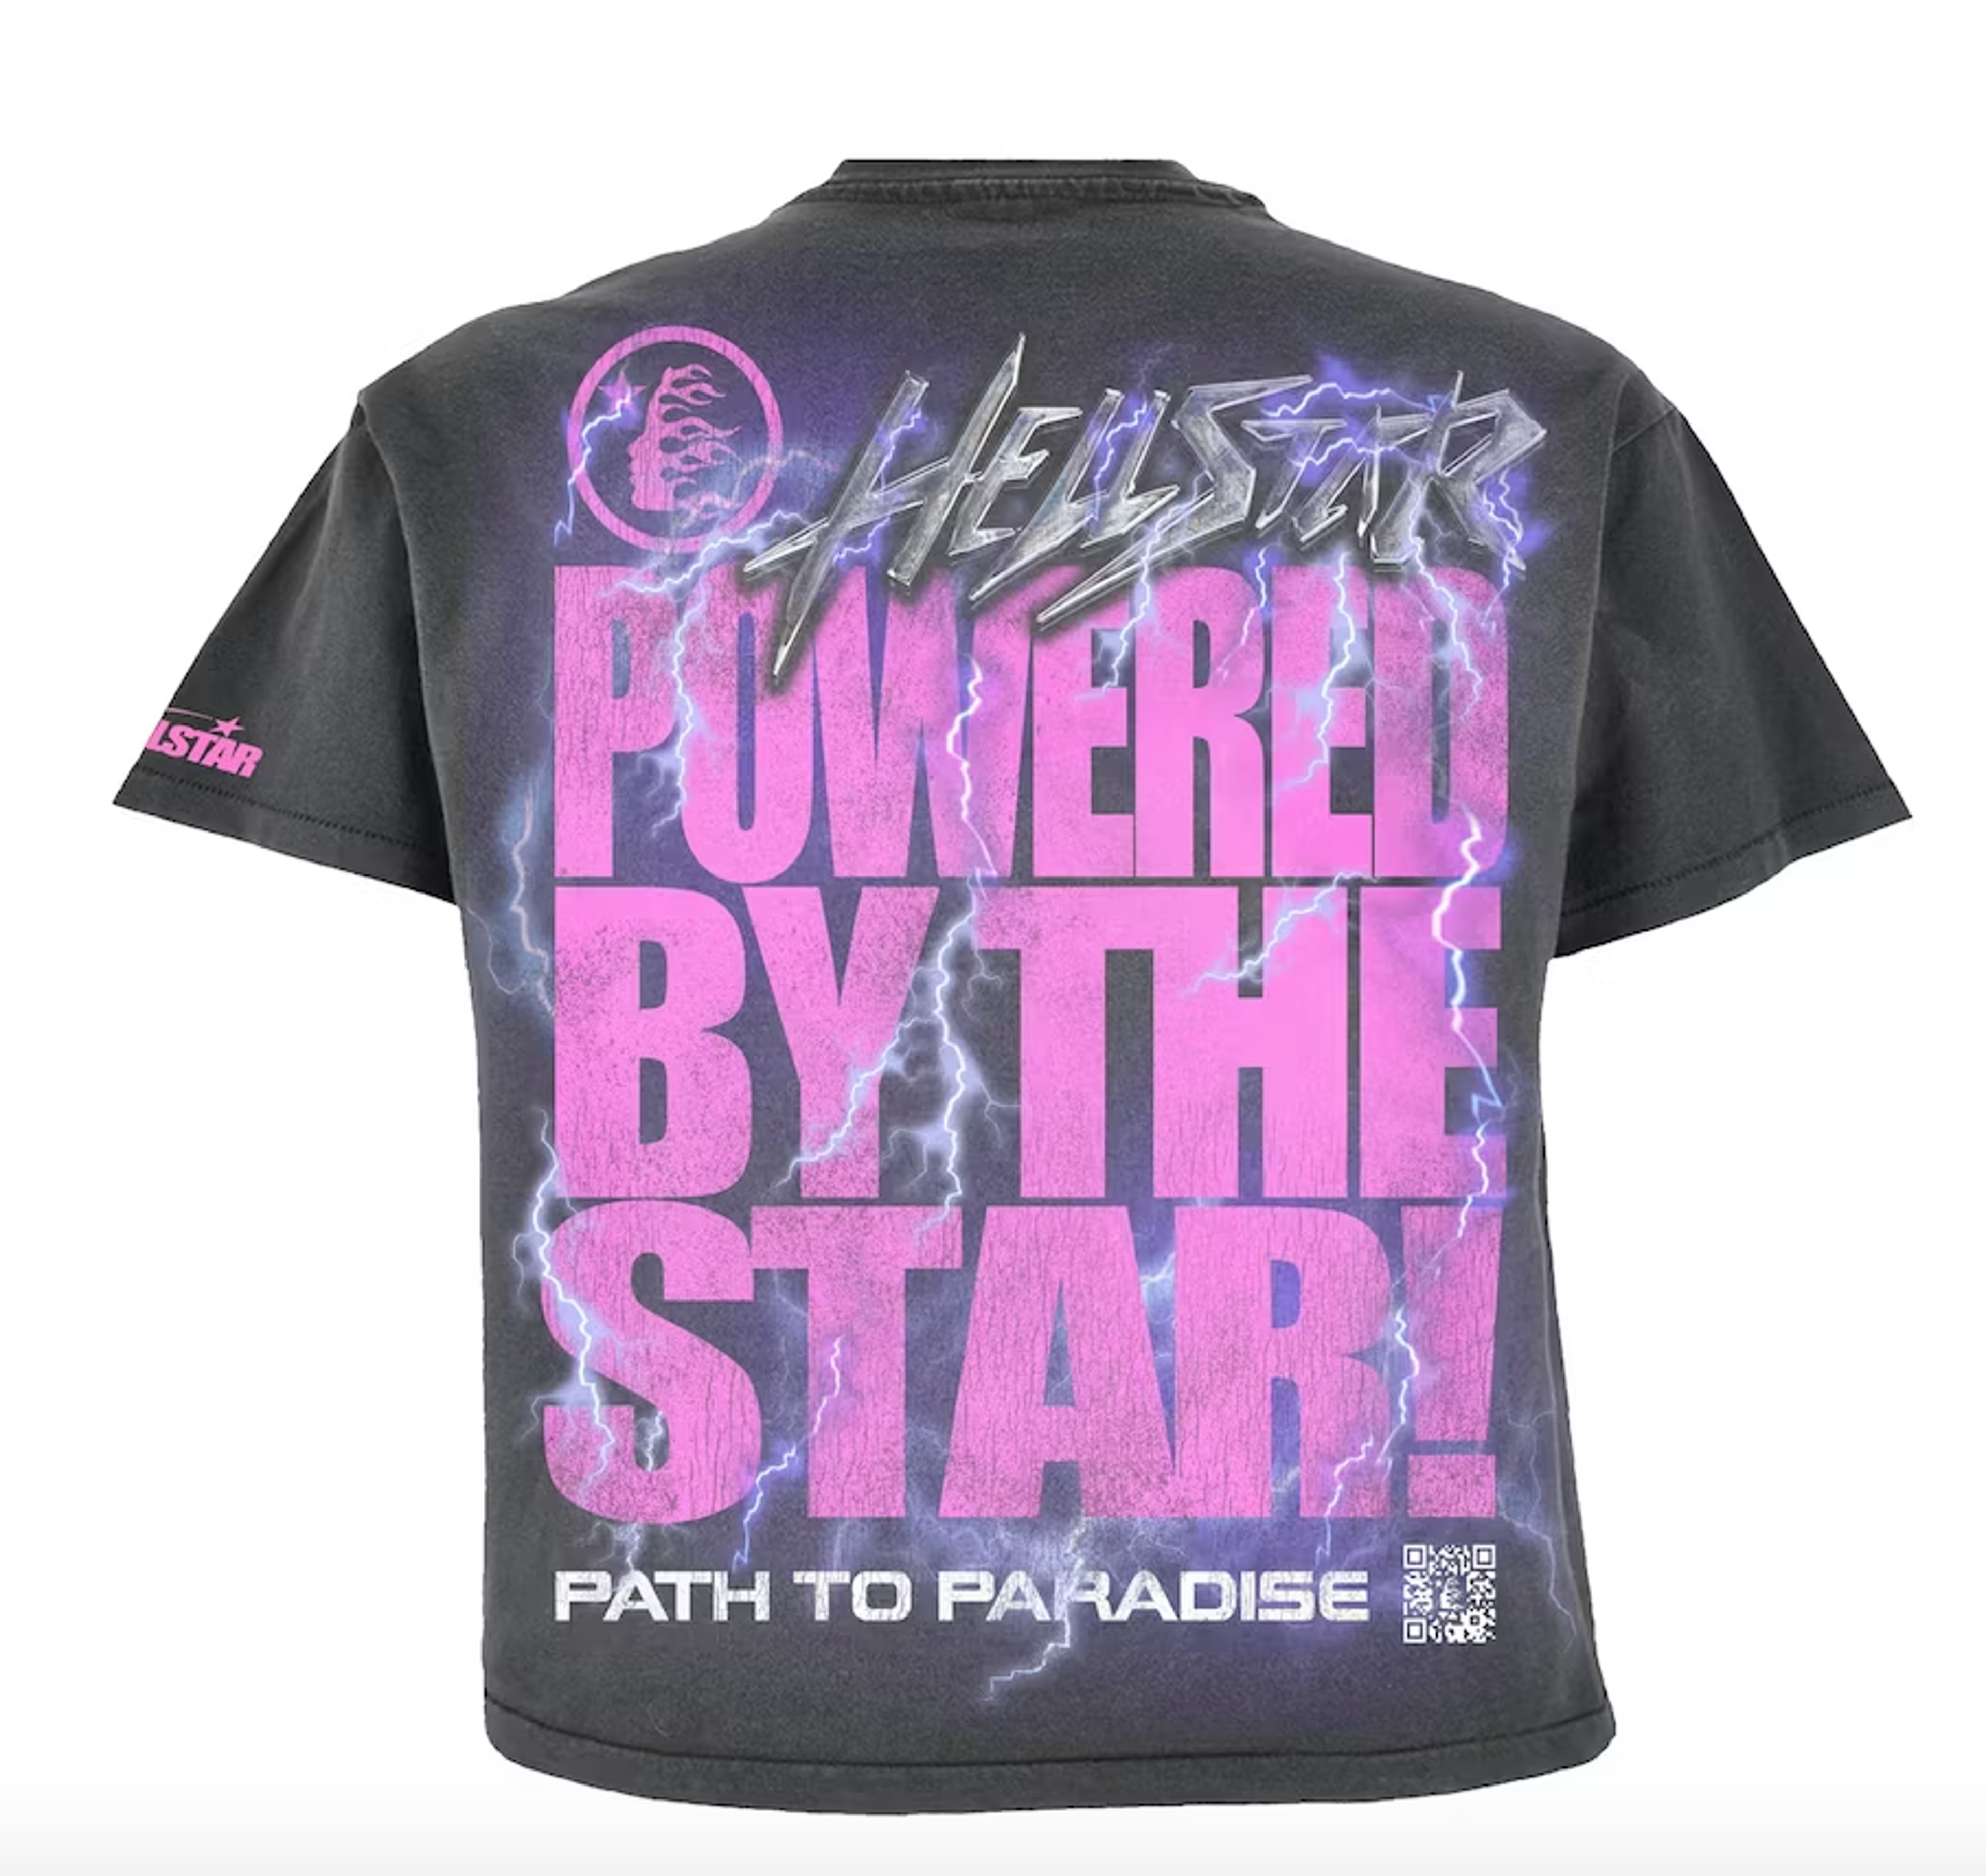 Alternate View 1 of Hellstar - Powered By The Star Tee